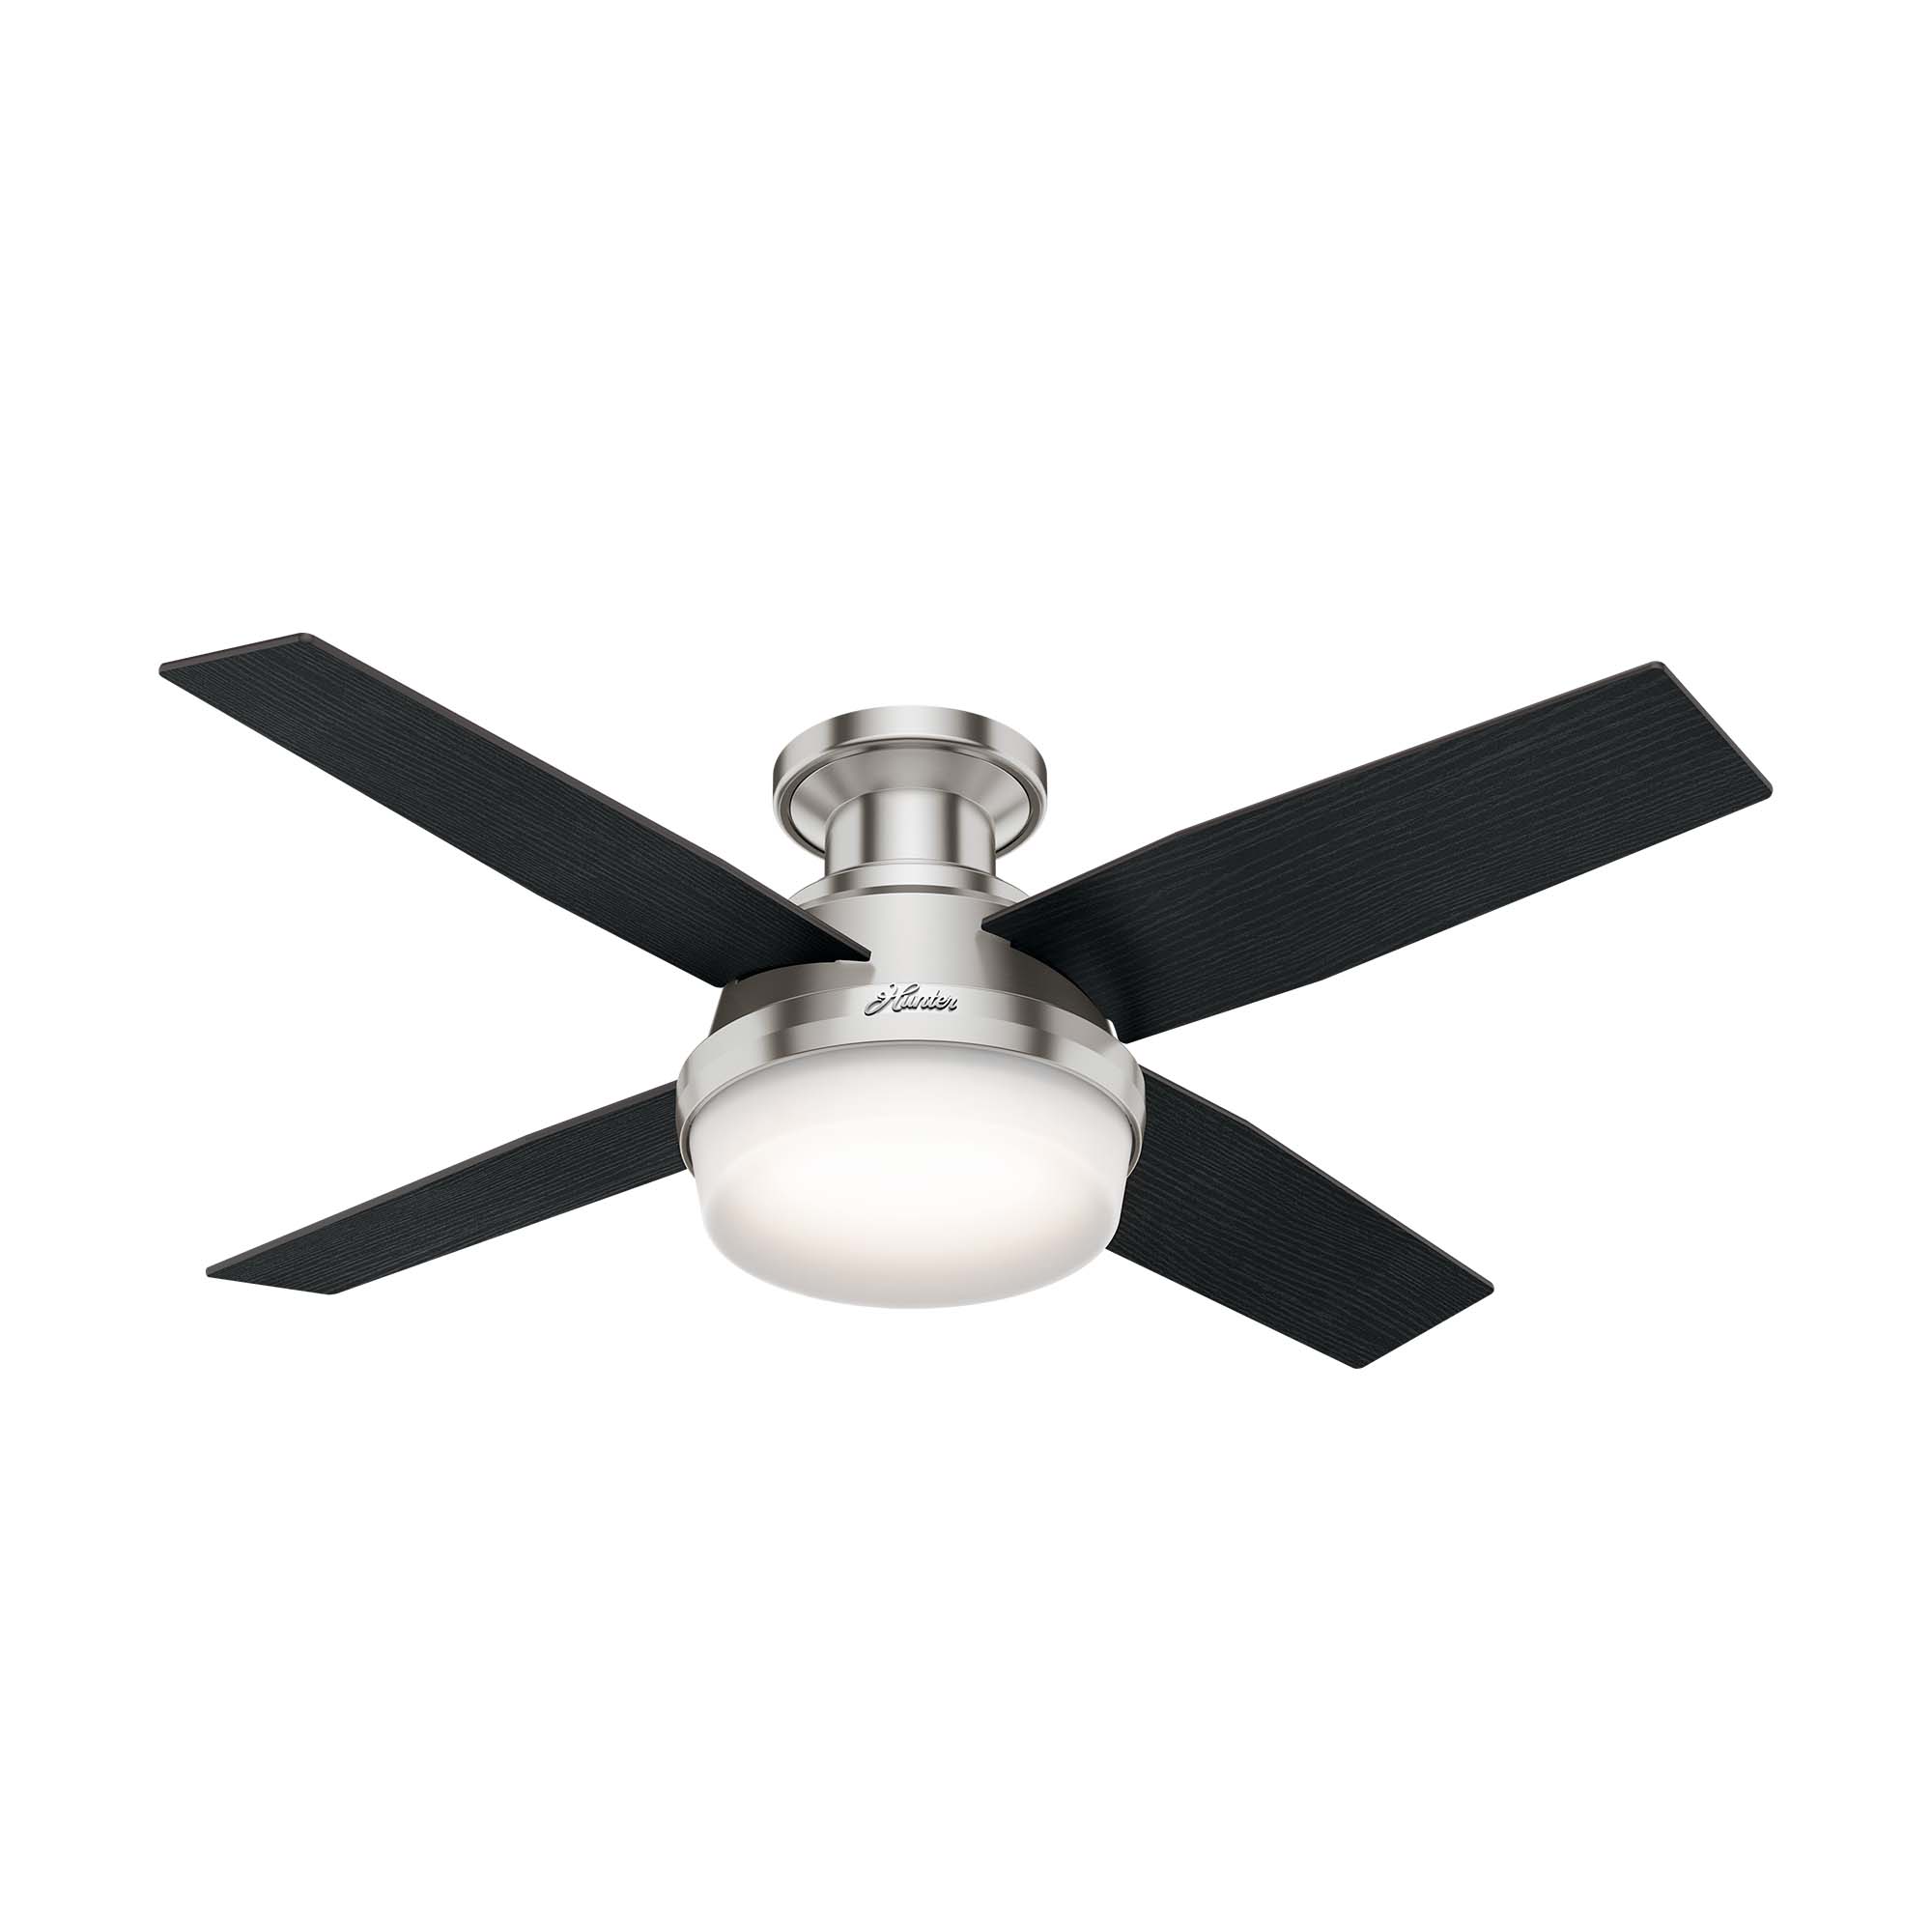 Hunter 44 inch Dempsey Low Profile Ceiling Fan with LED Light Kit and Handheld Remote